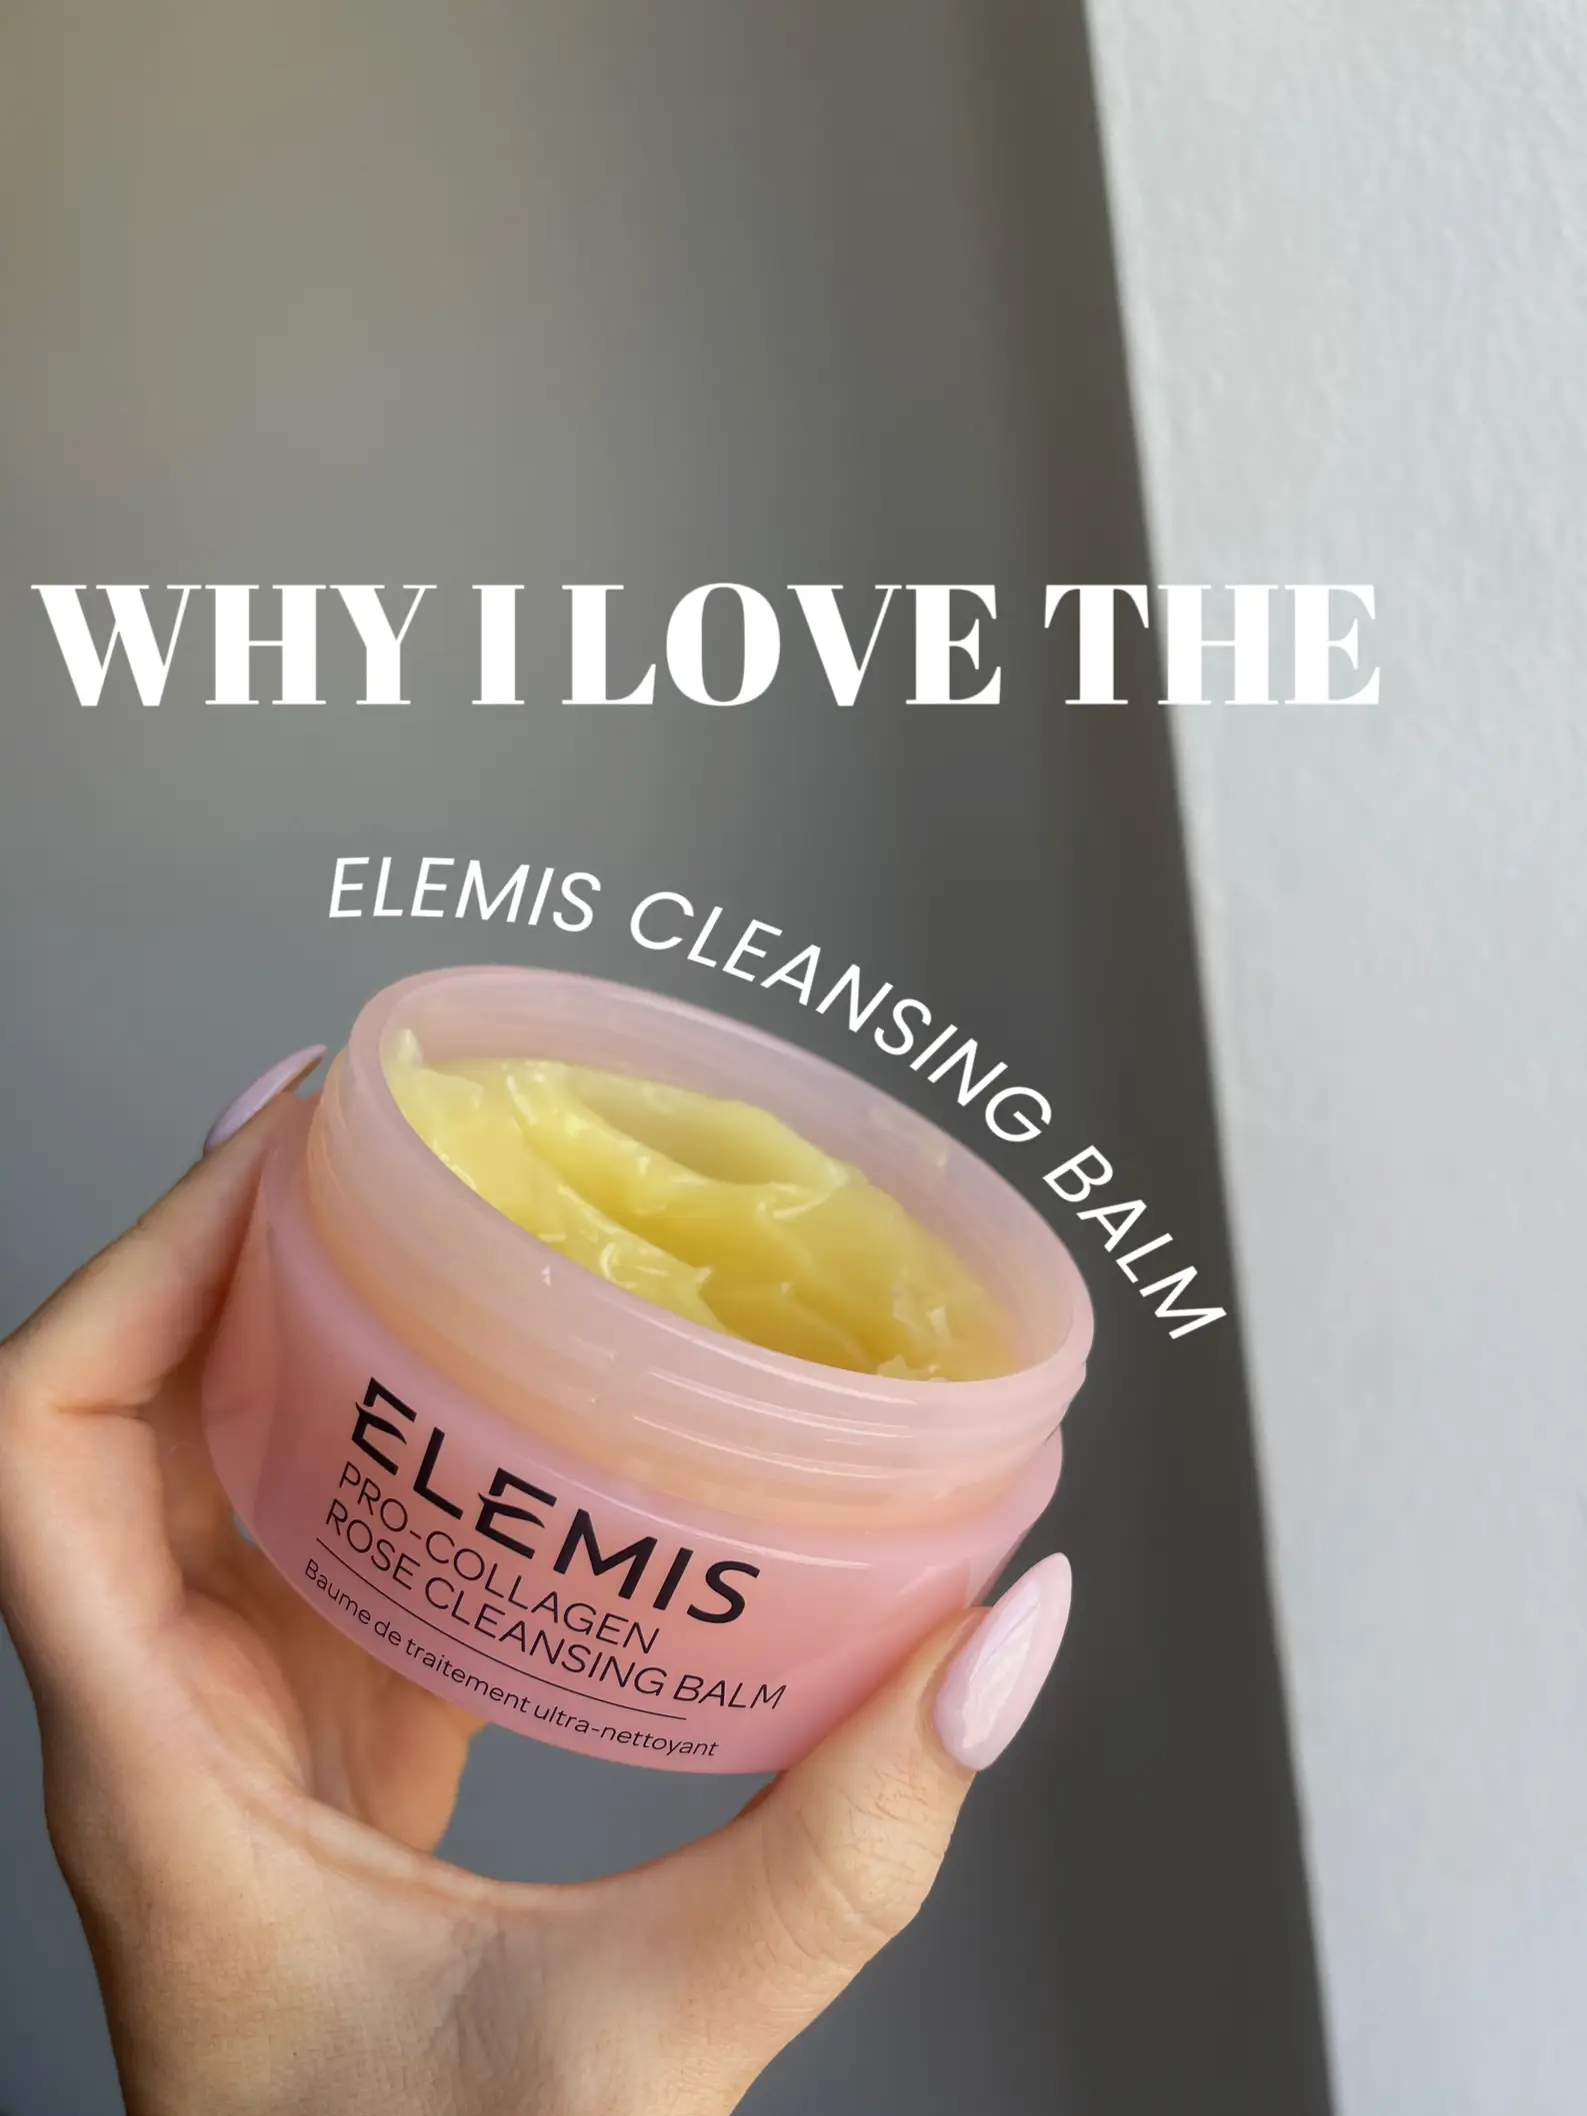 ELEMIS Cleansing Balm review: Our feedback, why it's worth it